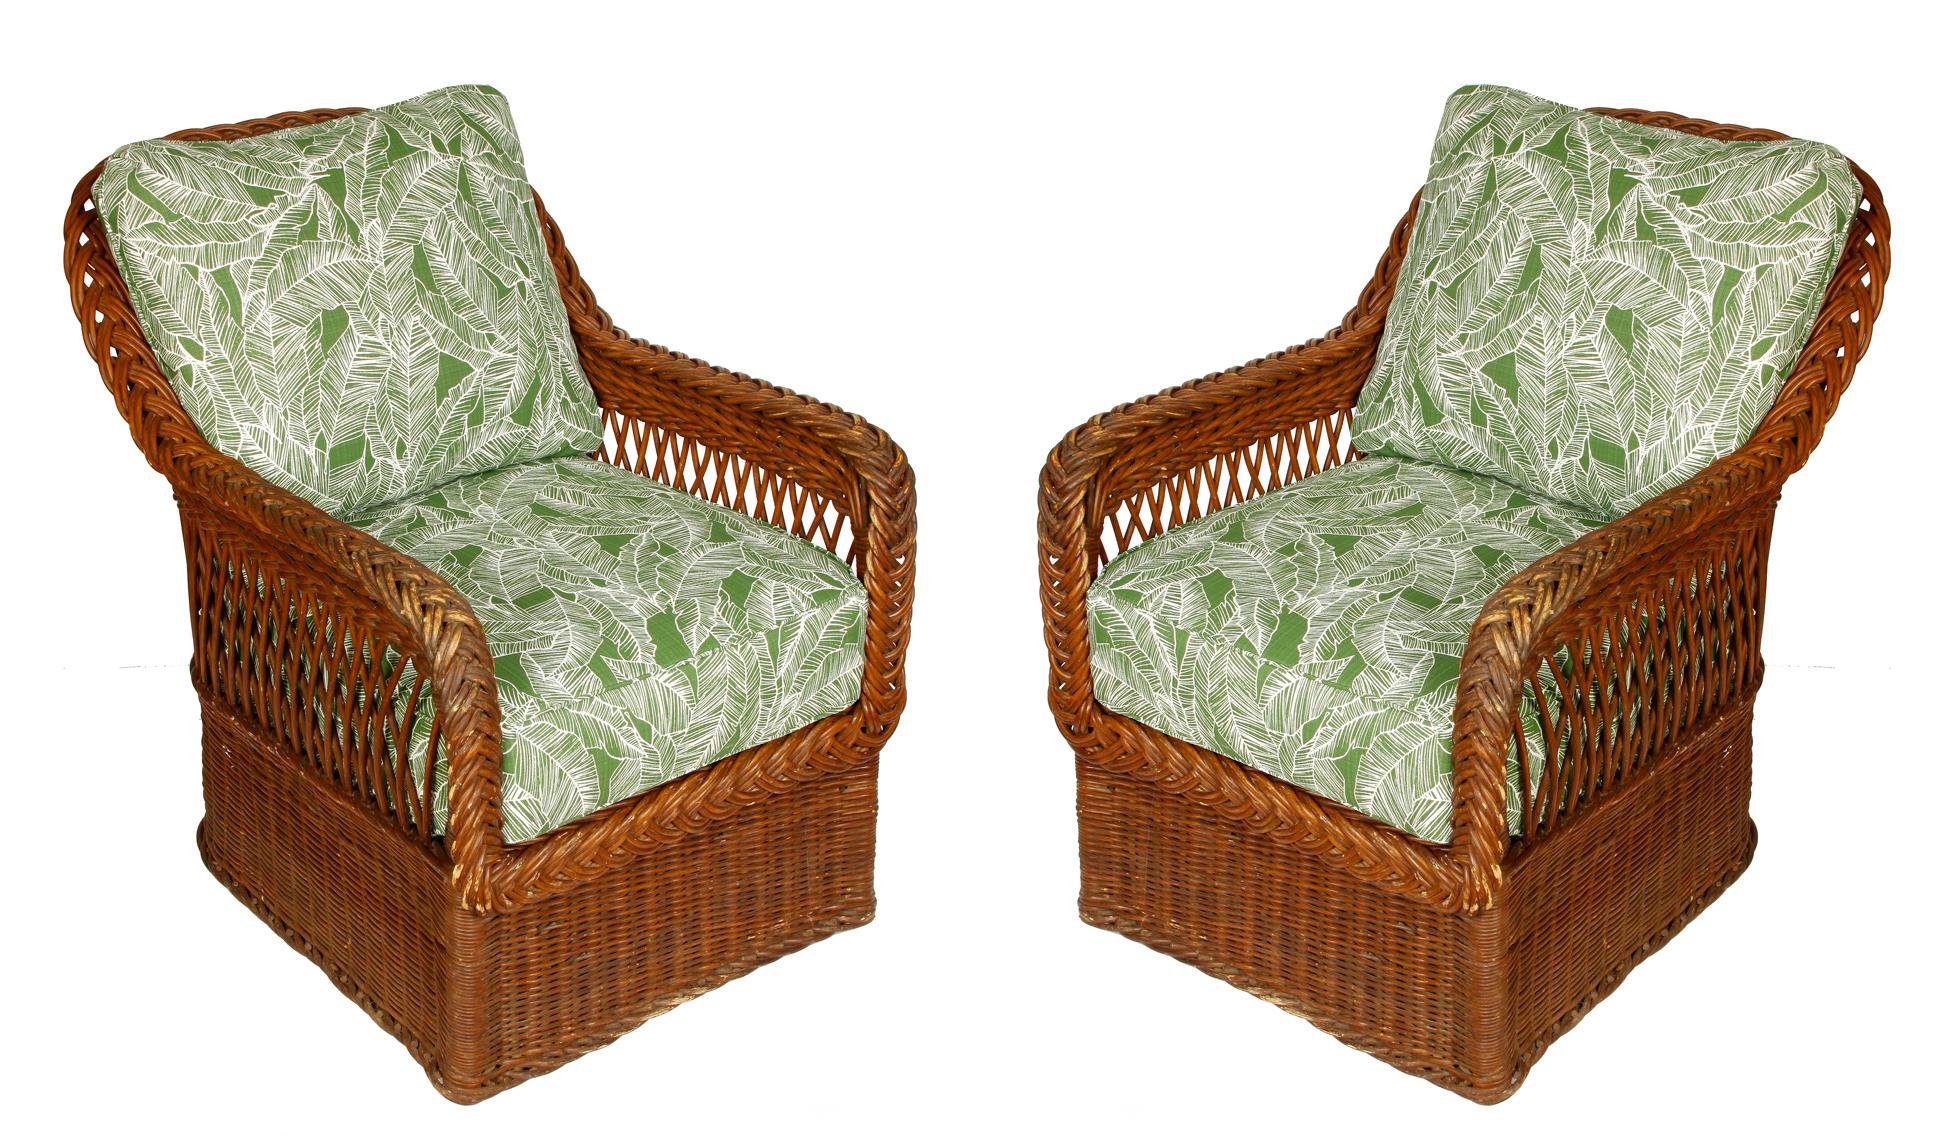 Vintage Ficks Reed wicker sofa and chairs set brought to life with new, outdoor green, palm leaf cushions. Sofa measures 72